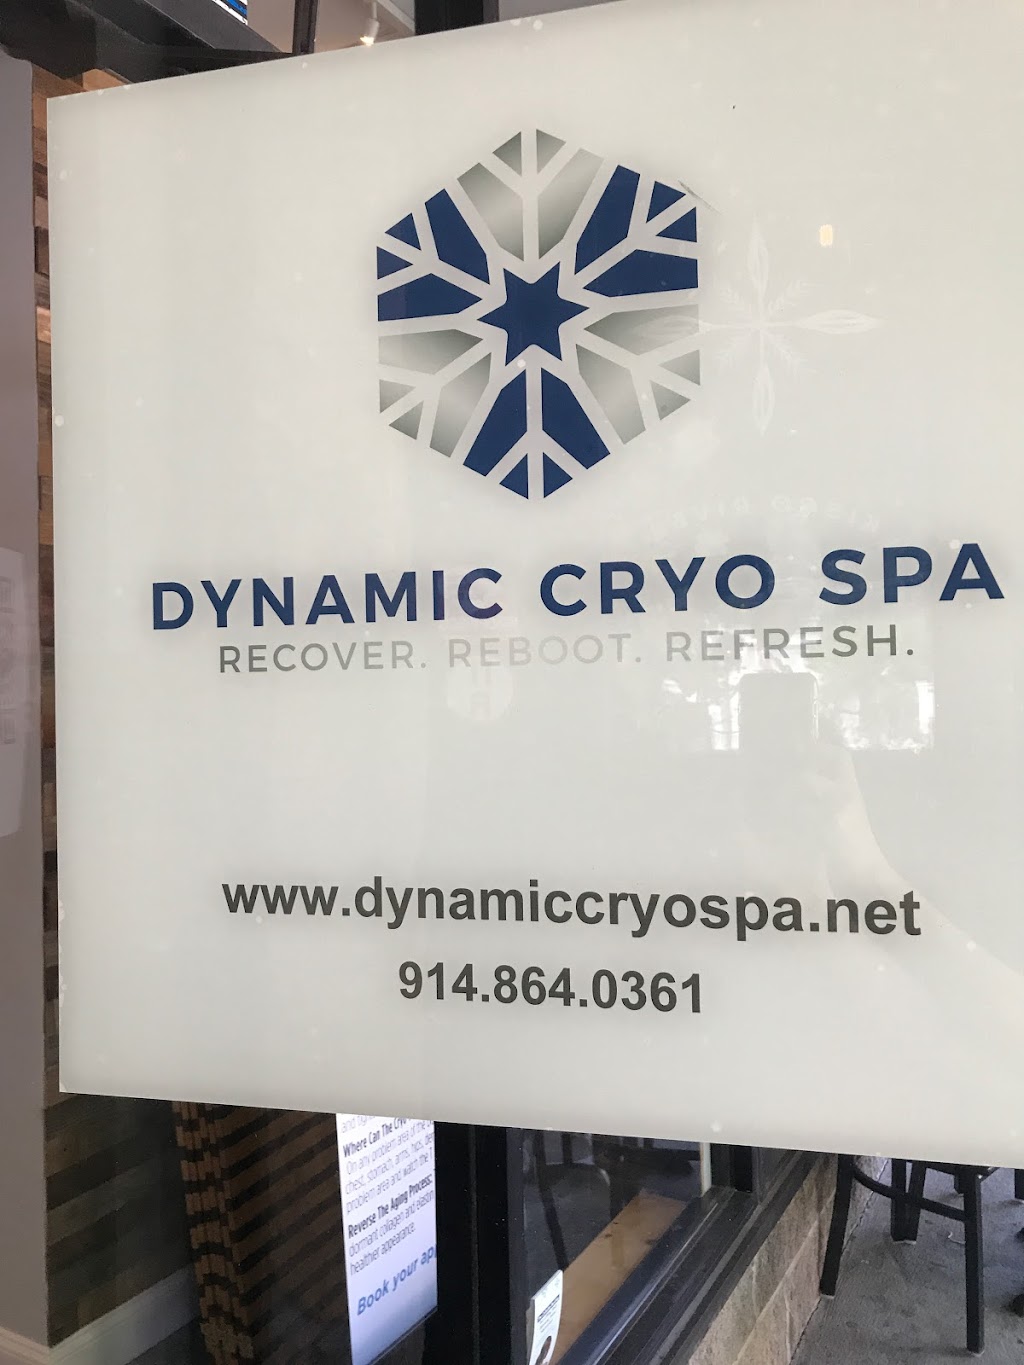 Dynamic Cryo Spa | 1806 Front St, Yorktown Heights, NY 10598 | Phone: (914) 214-8794